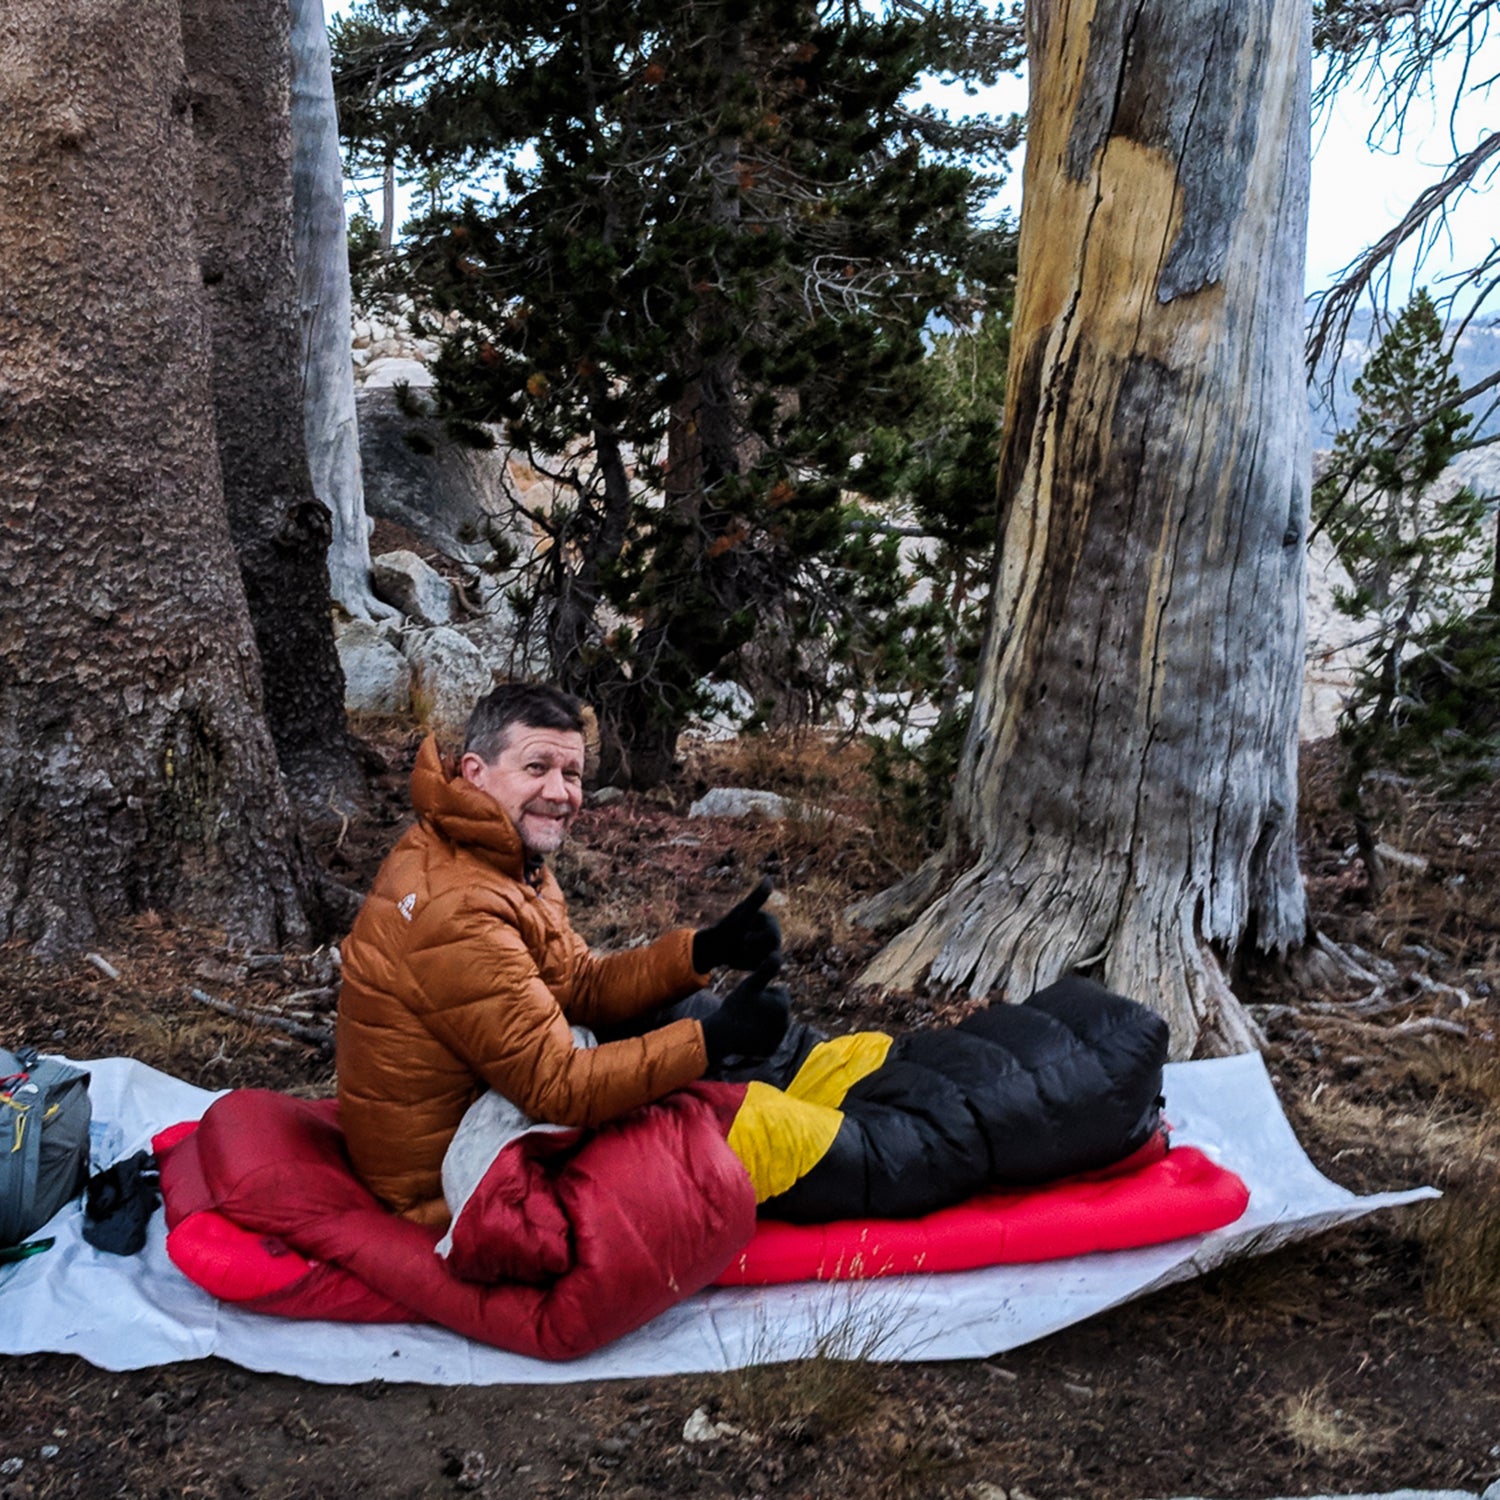 Review: Big Agnes Insulated AXL Pad